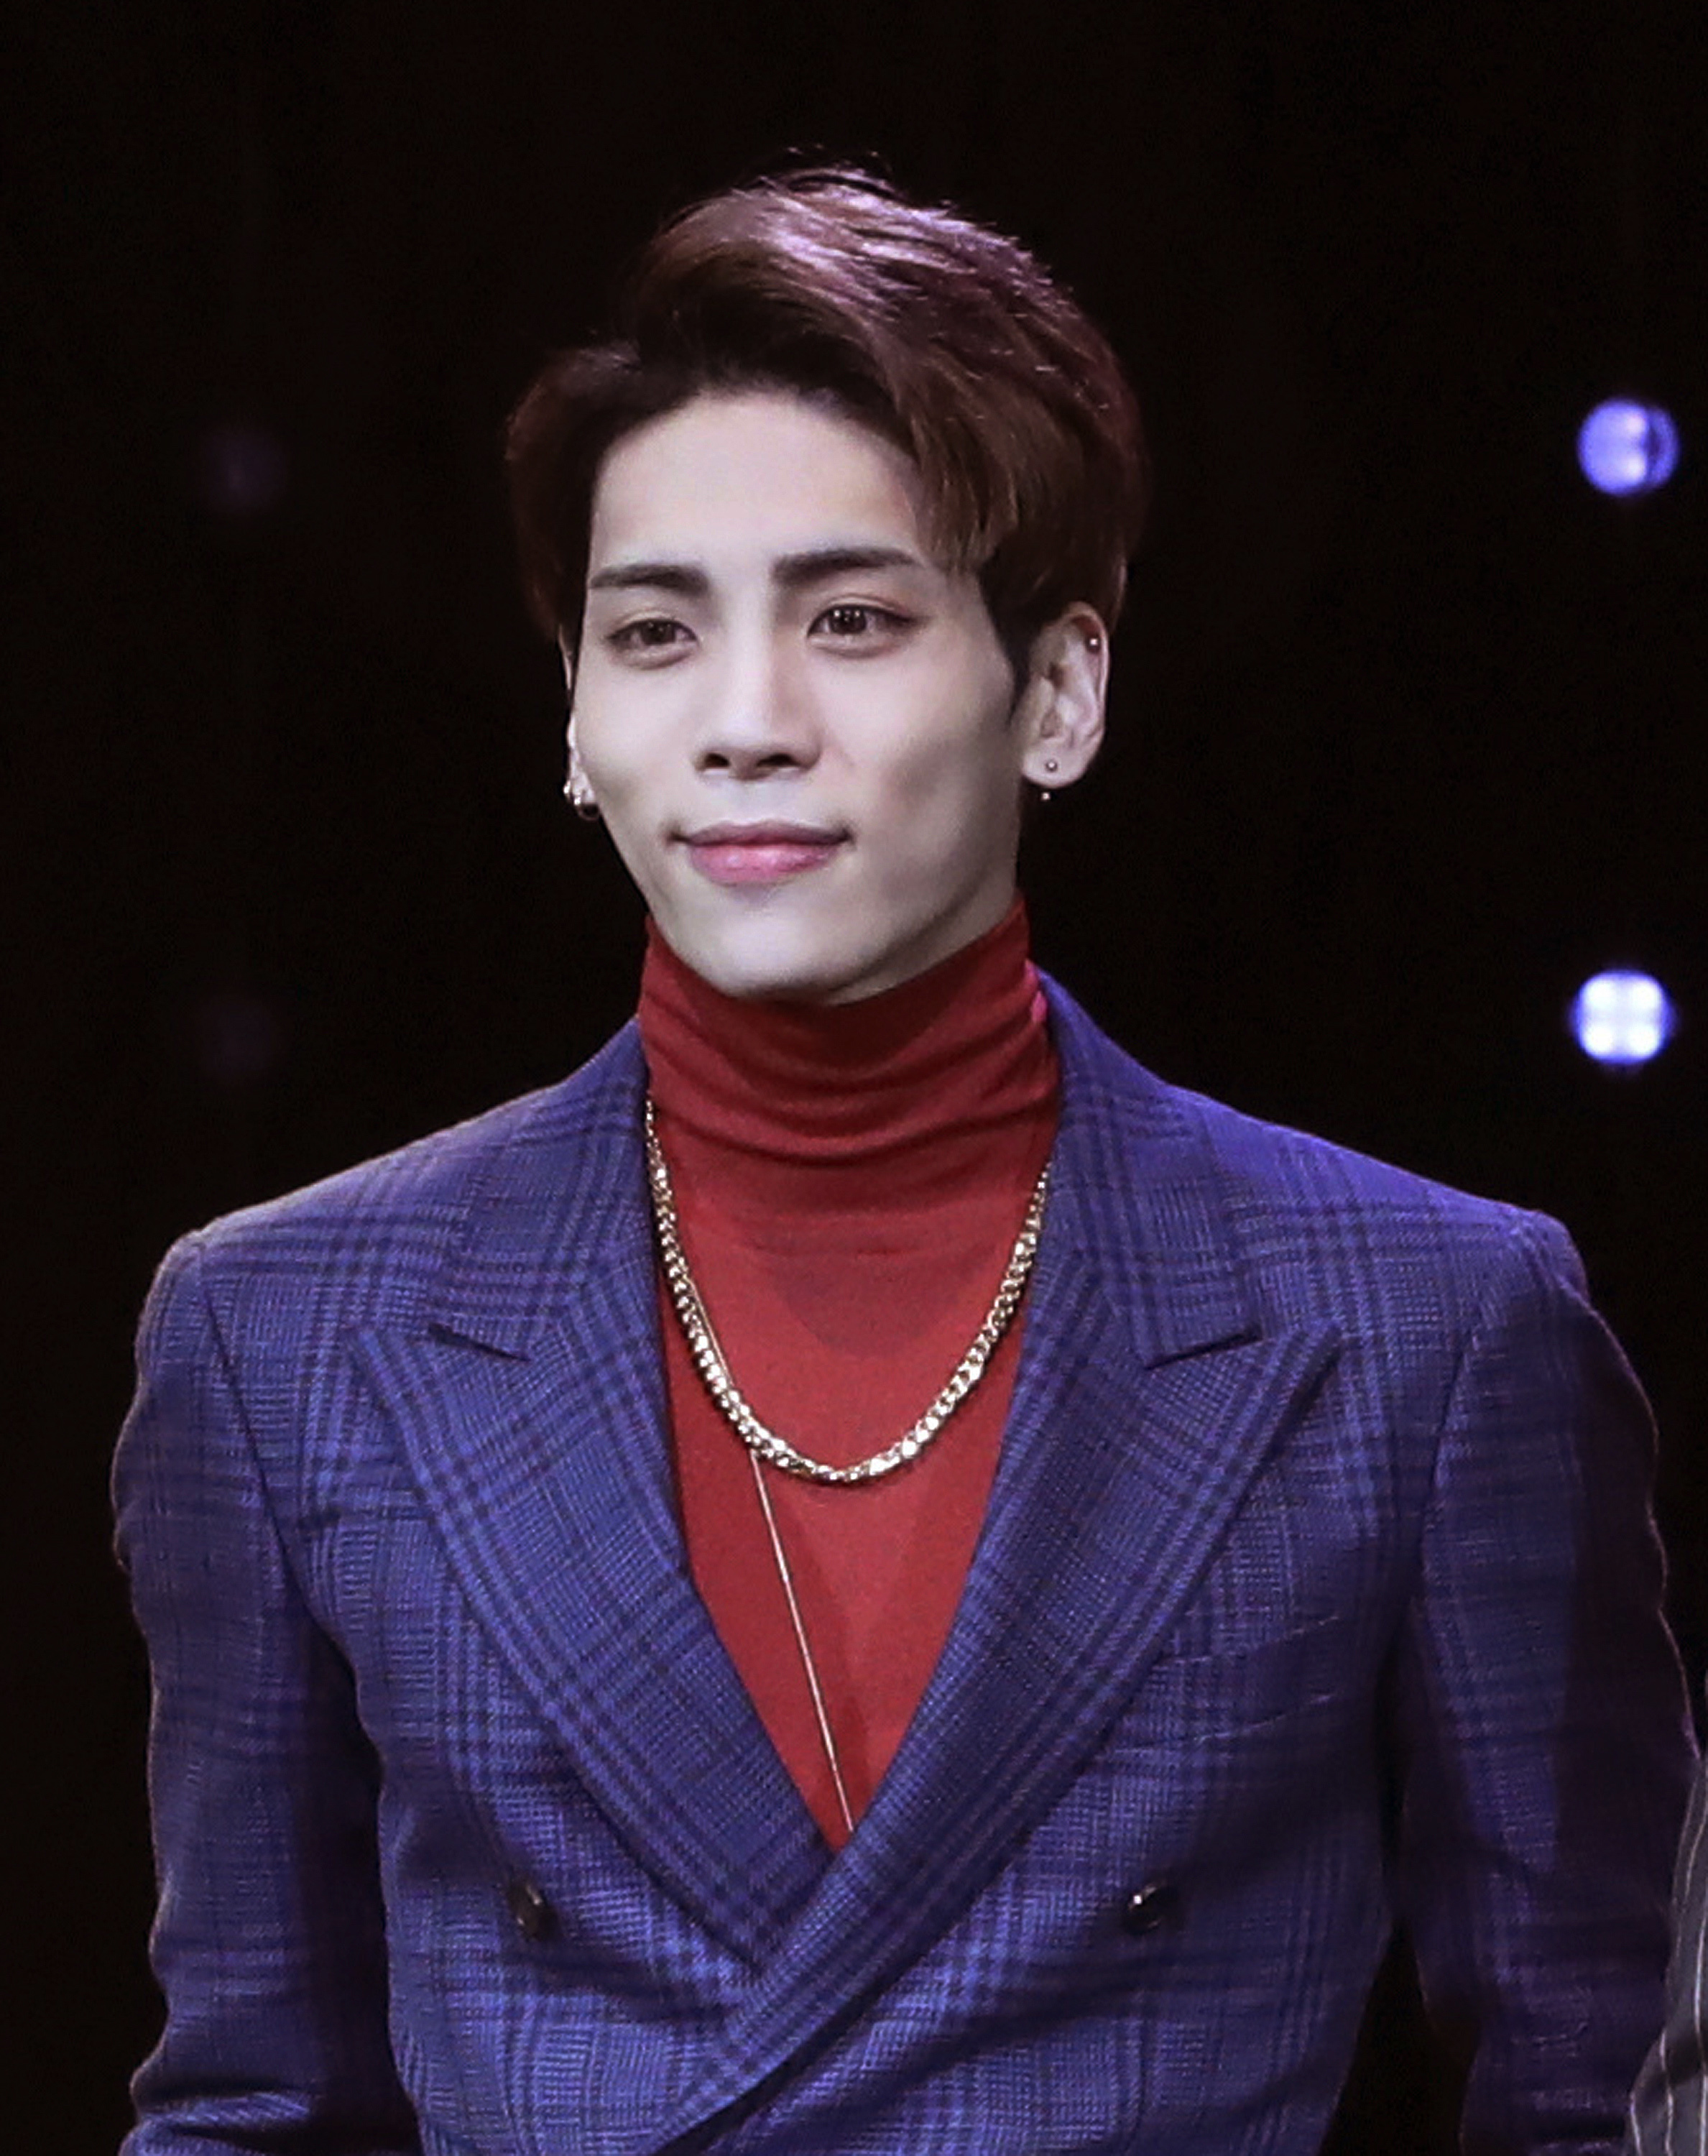 FILE - In this Oct. 4, 2016, file photo, Kim Jong-hyun, a member of South Korean K-pop group SHINee, poses for the media before a showcase for the group's album "1 of 1" in Seoul, South Korea. Kim Jong-hyun, better known by the stage name Jonghyun, was found unconscious at a residence hotel in Seoul and was pronounced dead later at a nearby hospital, Seoul police said Monday Dec. 18, 2017. (AP Photo/Lee Jin-man, File)